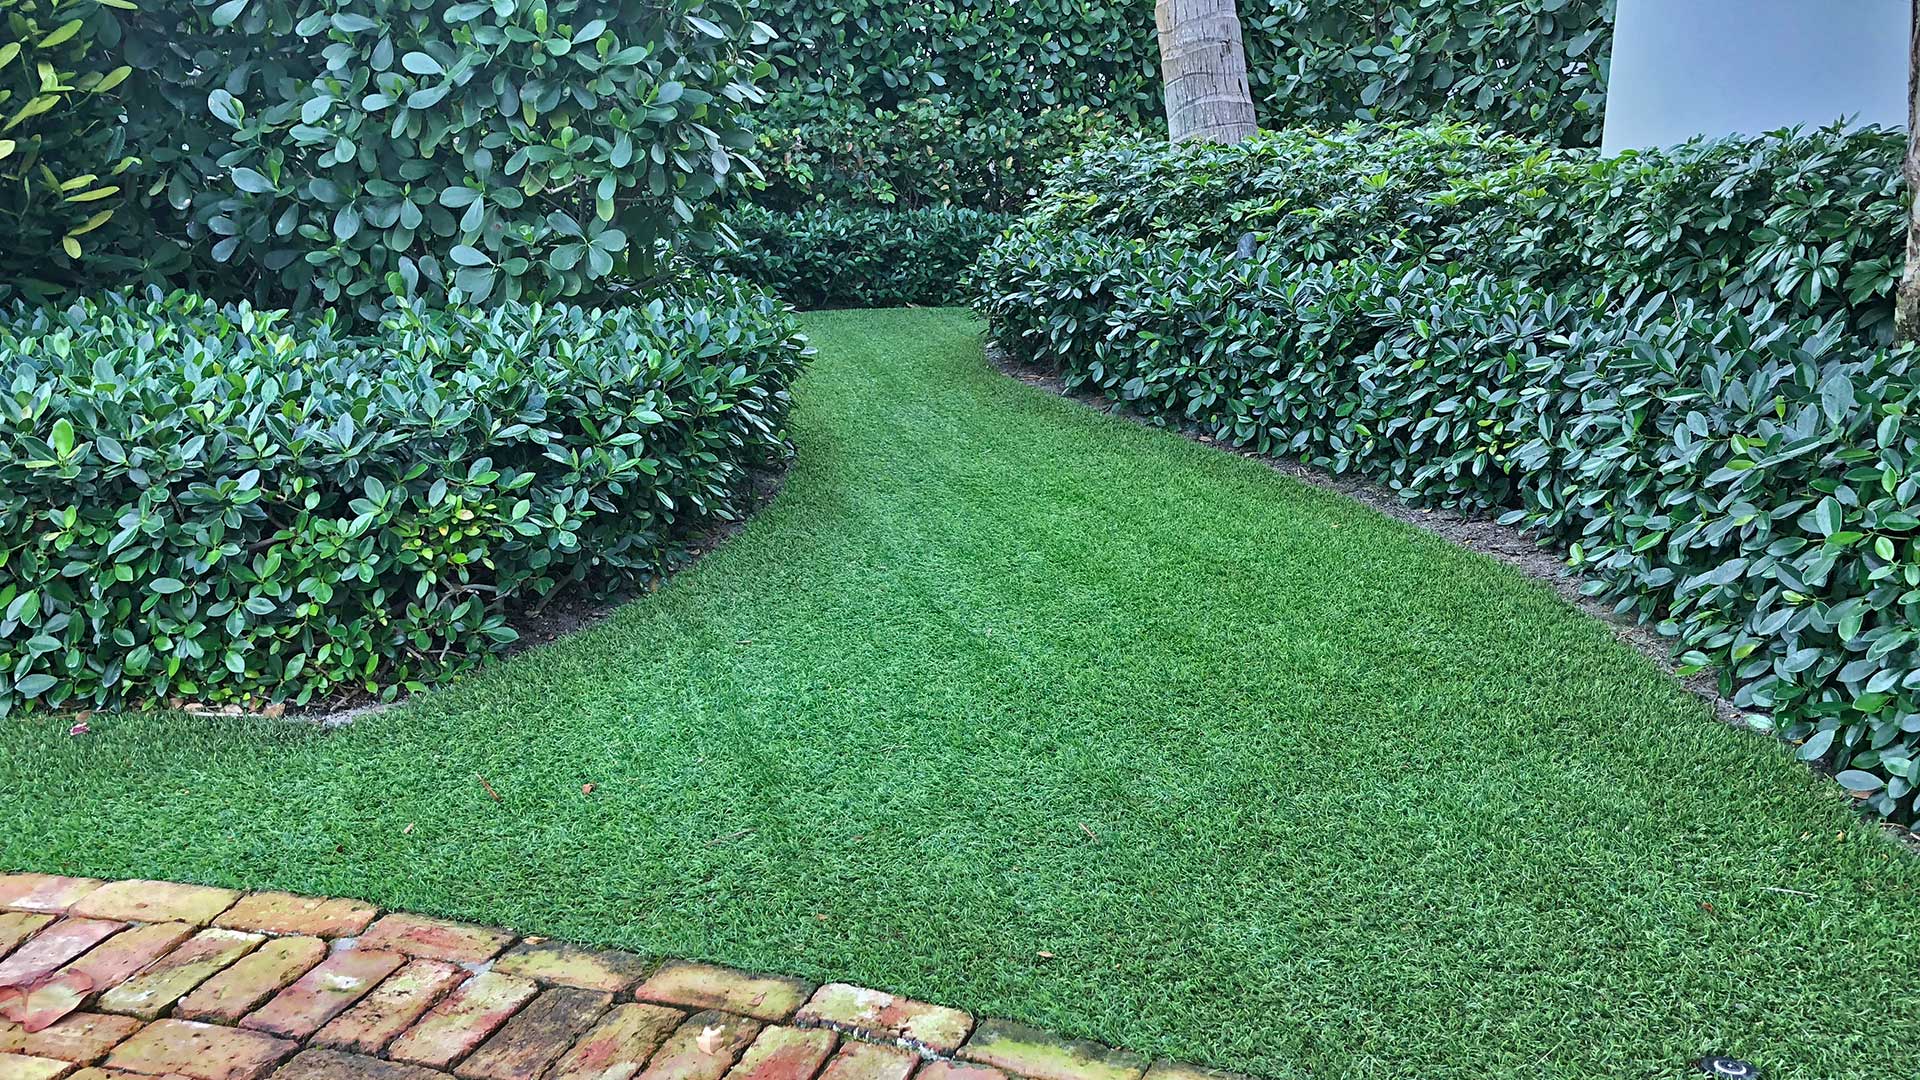 Artificial turf and landscape trimming at a home in Palm Beach, FL.